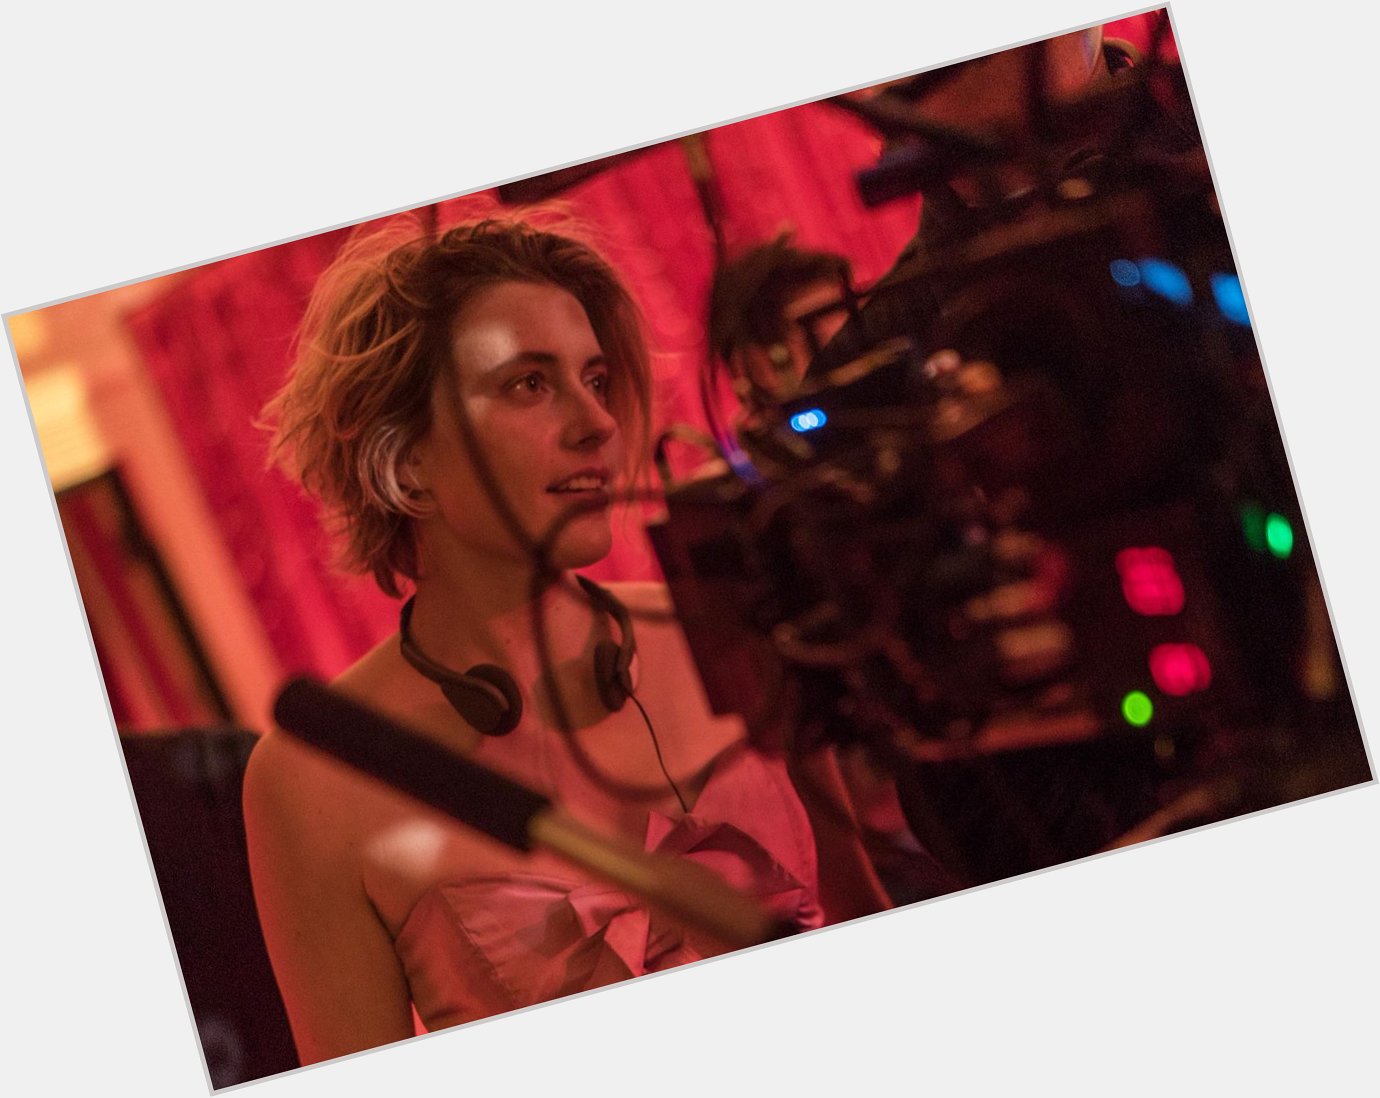 Happy birthday to the incredible Greta Gerwig, who continues to amaze us both on and off screen  